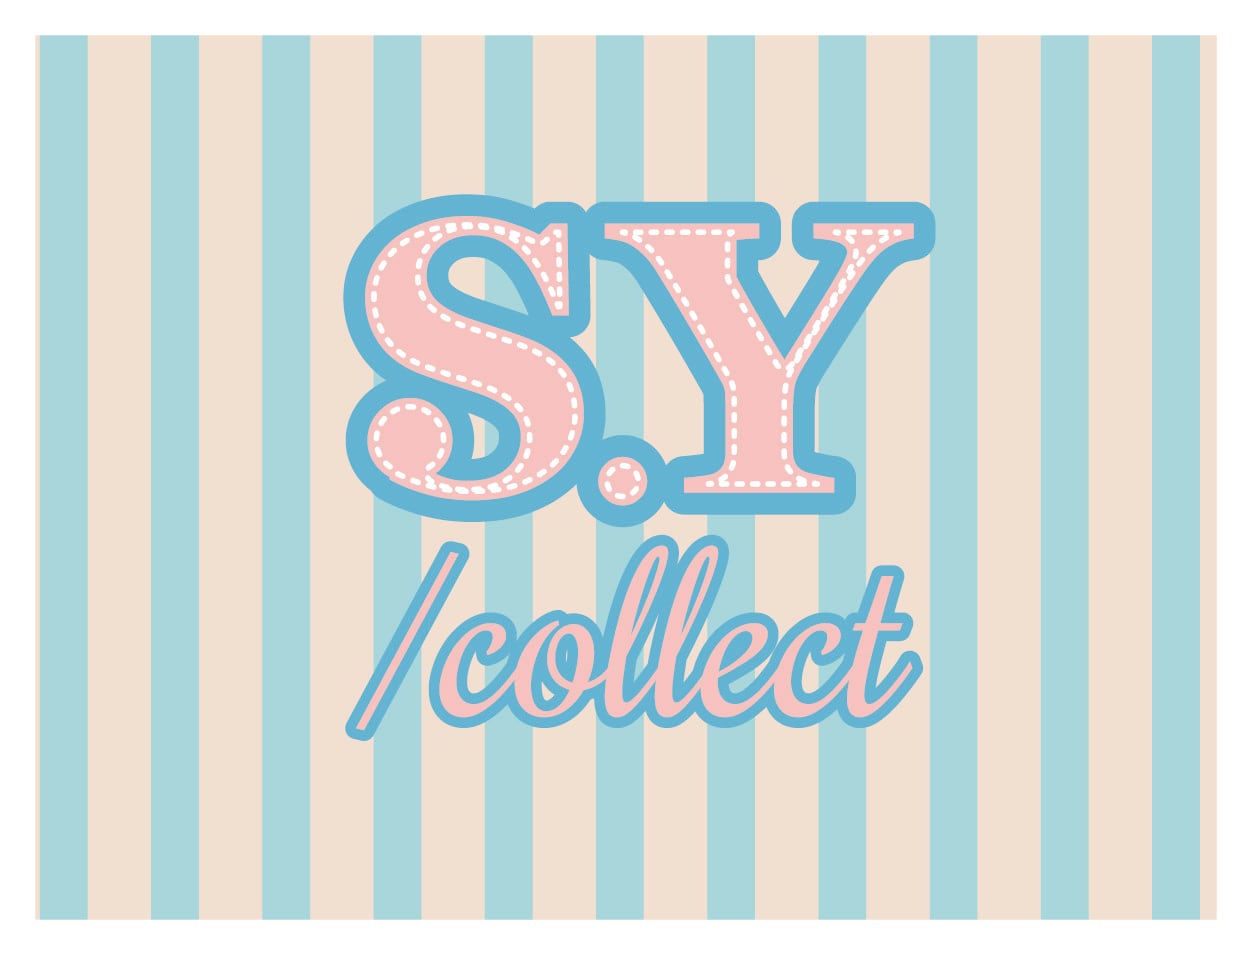 S.Y/collect